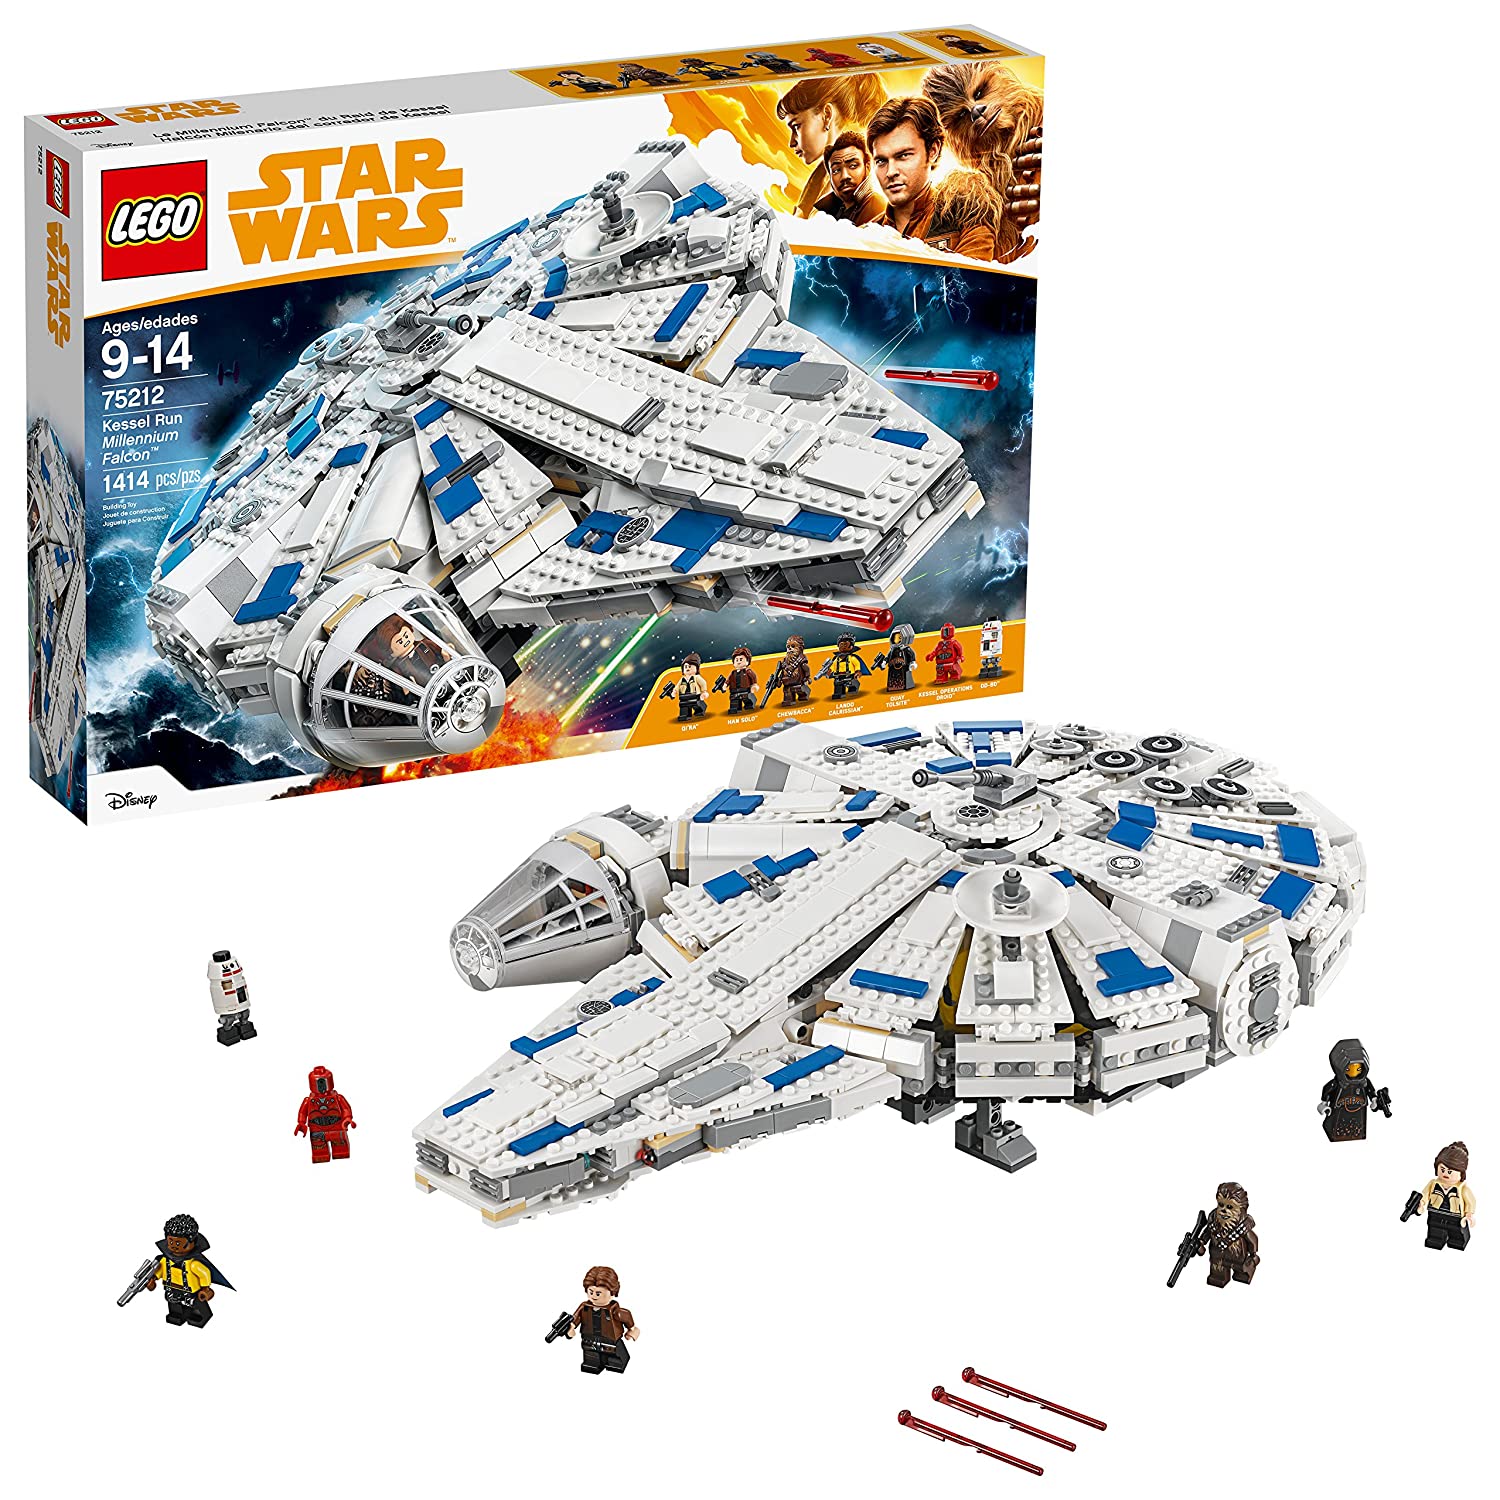 LEGO Star Wars Solo: A Star Wars Story Kessel Run Millennium Falcon 75212 Building Kit and Starship Model Set, Popular Building Toy and Gift for Kids 